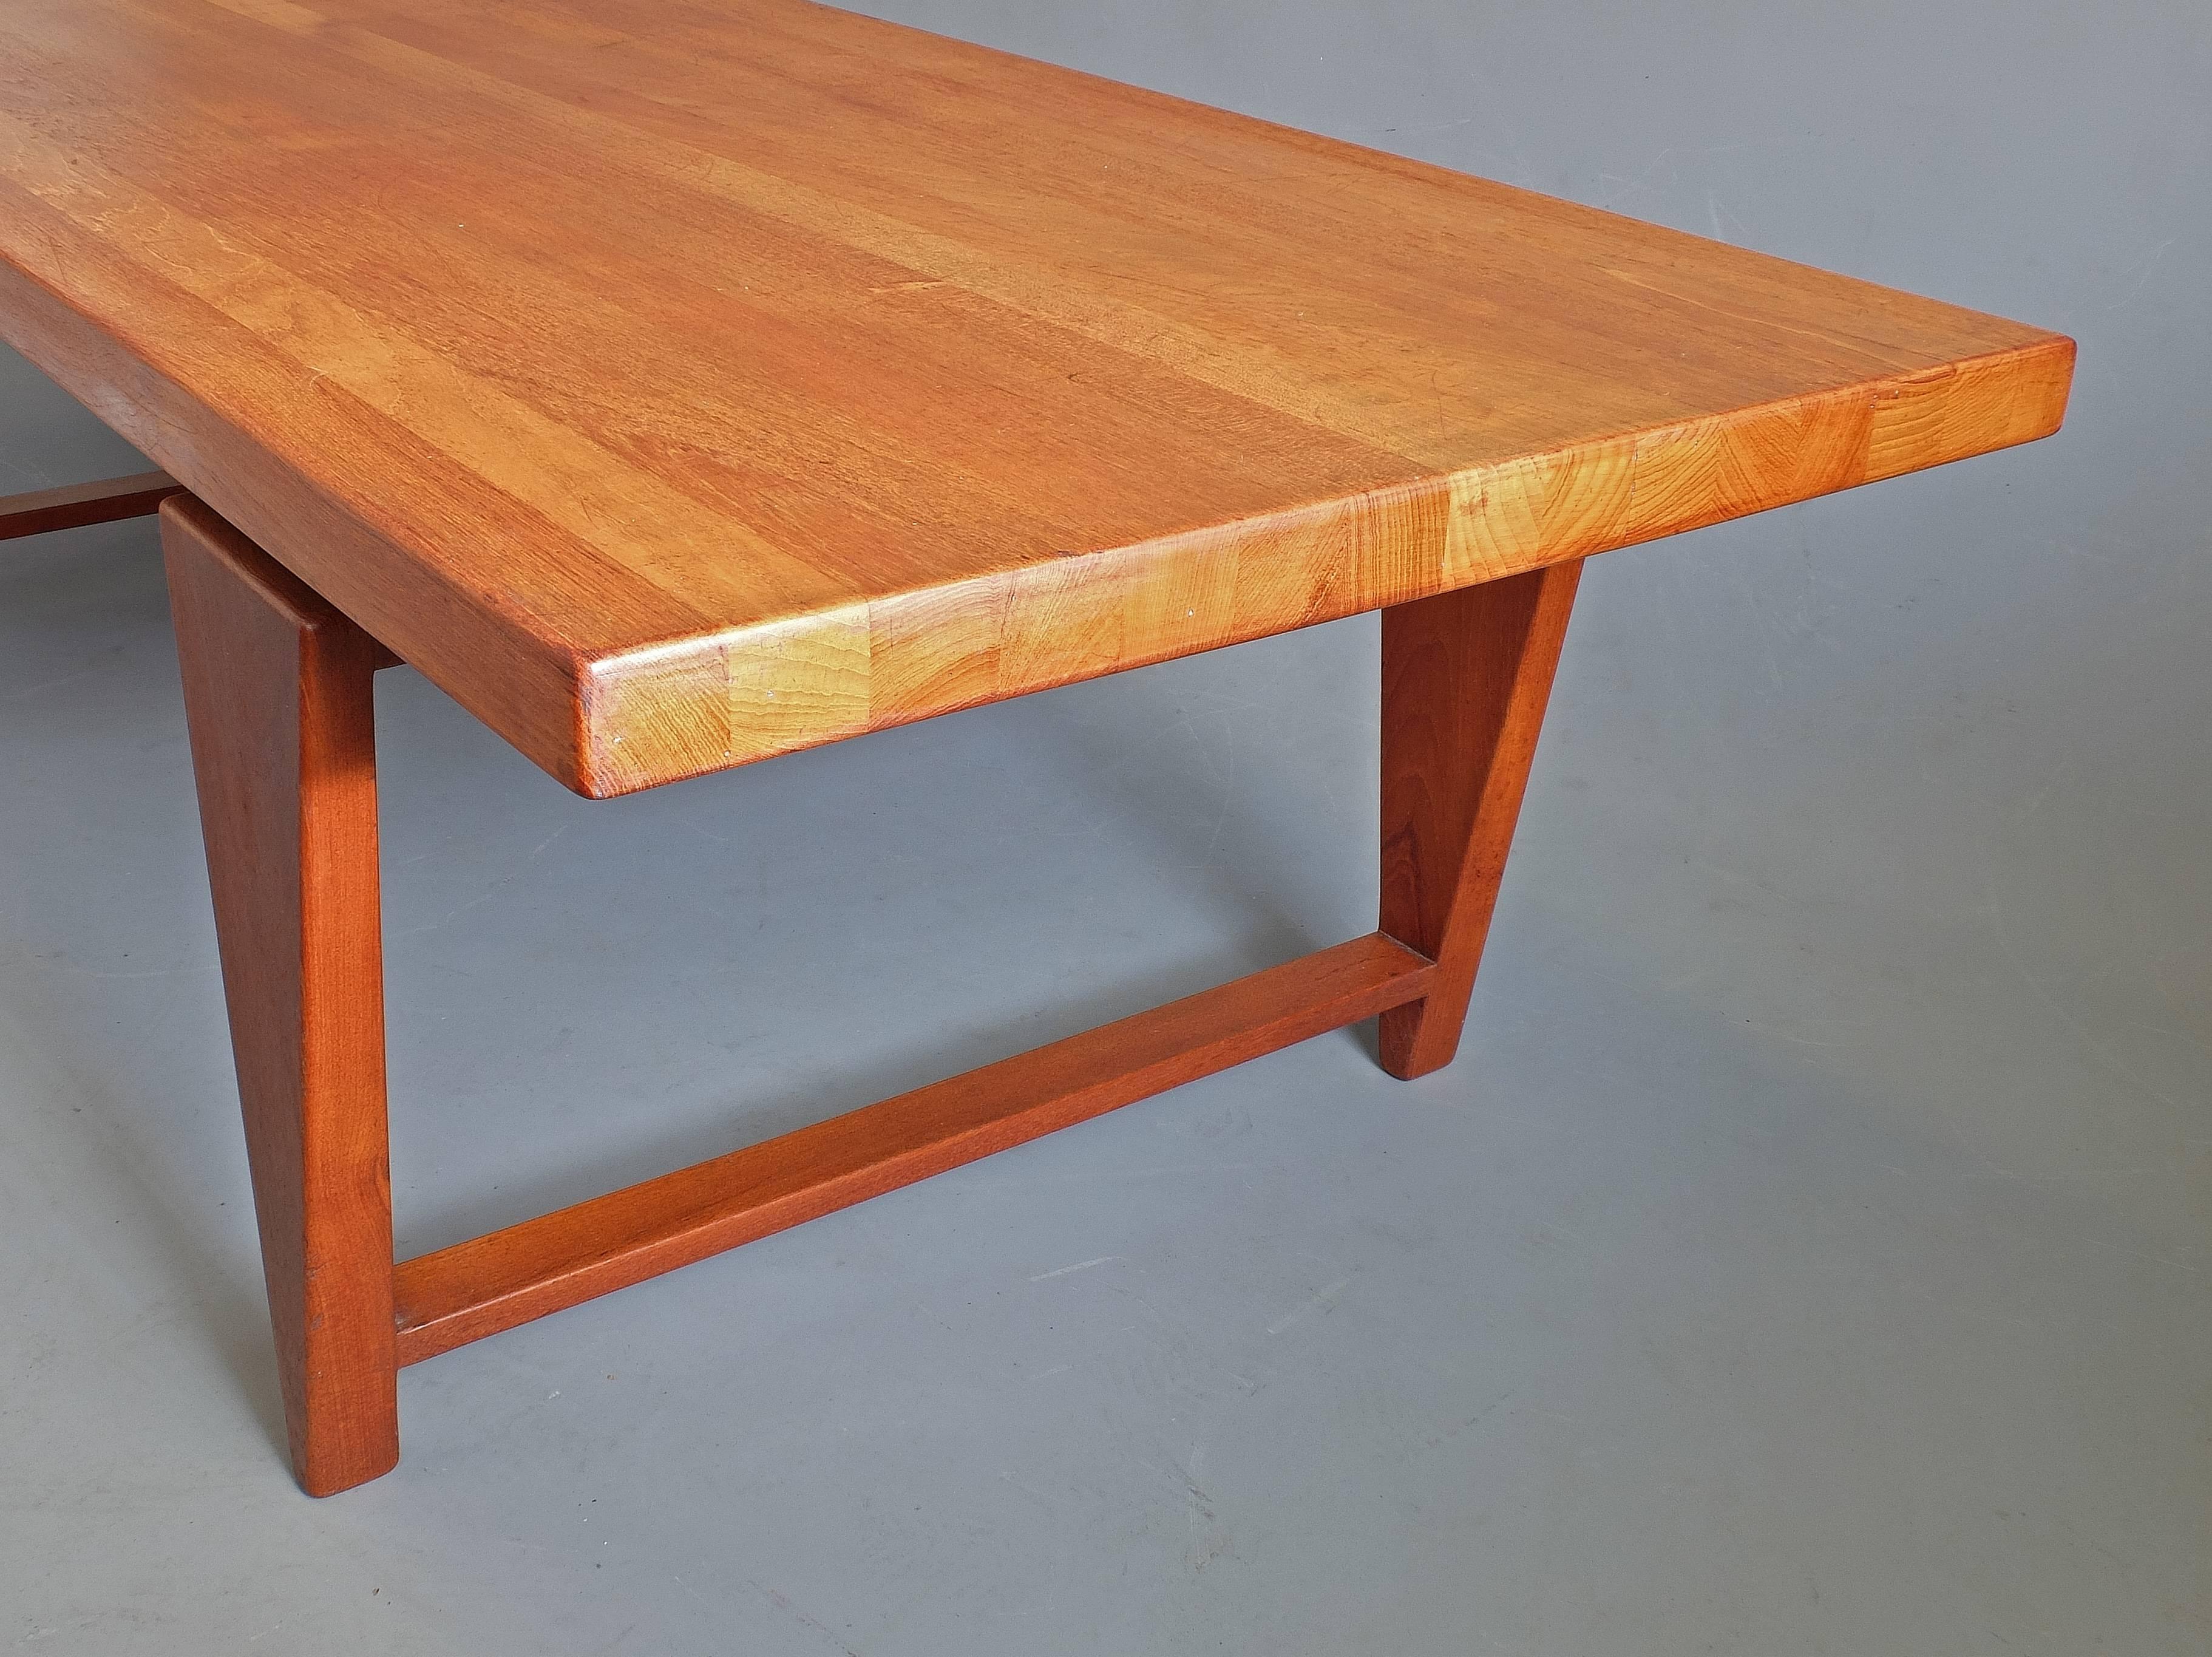 Illum Wikkelso Coffee Table Architectural Solid Teak 1960s Danish For Sale 2